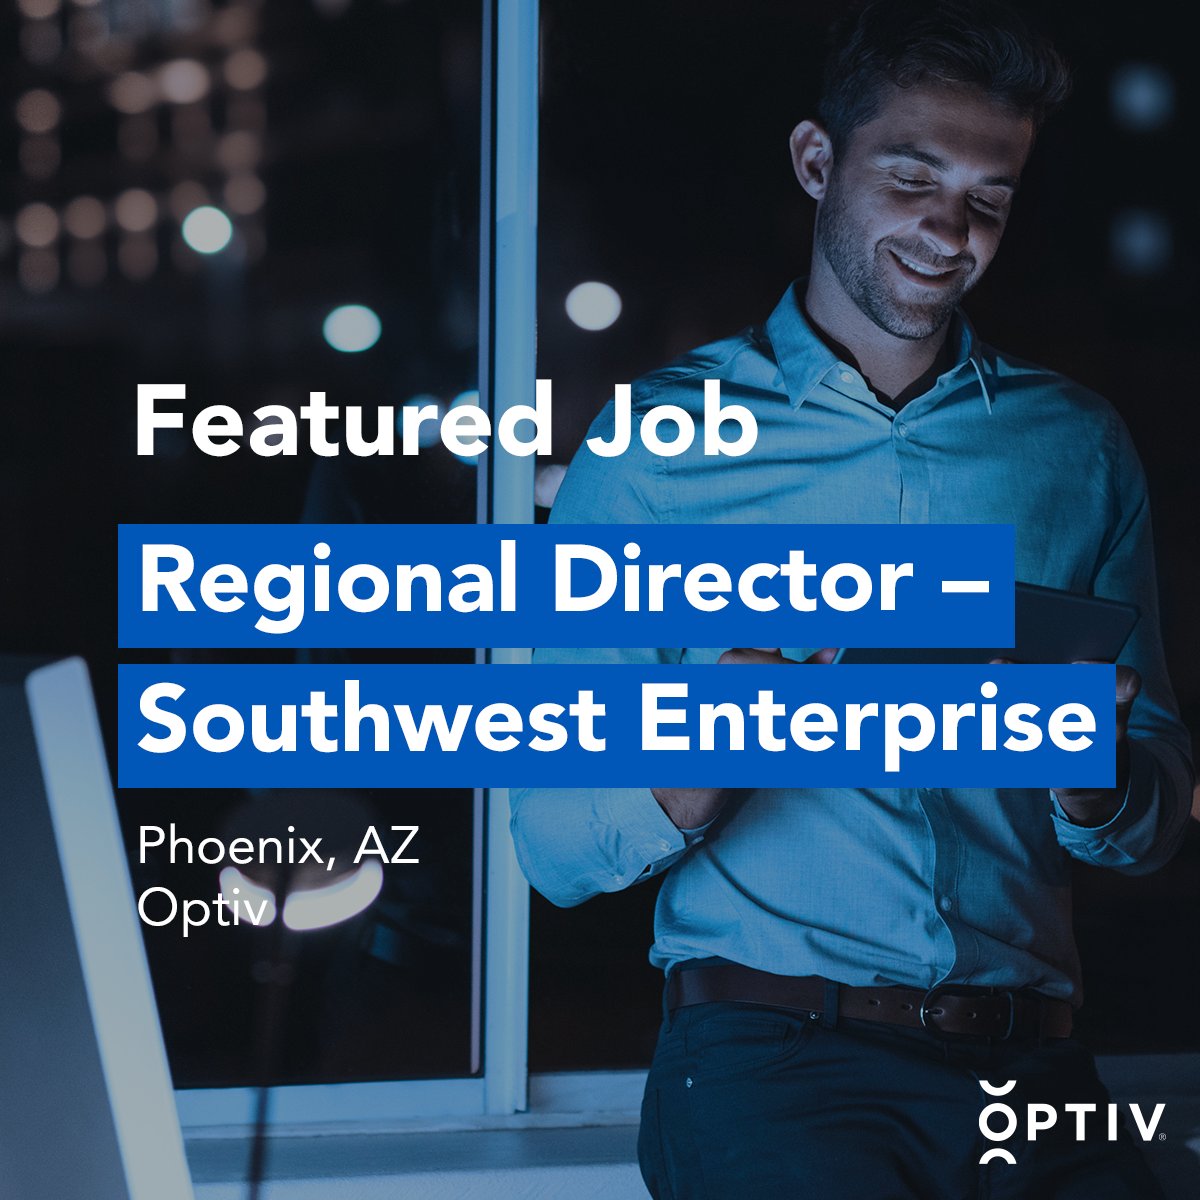 We’re hiring a Regional Director – Southwest Enterprise! Learn more about #OptivCareers and apply: direc.to/k2mG